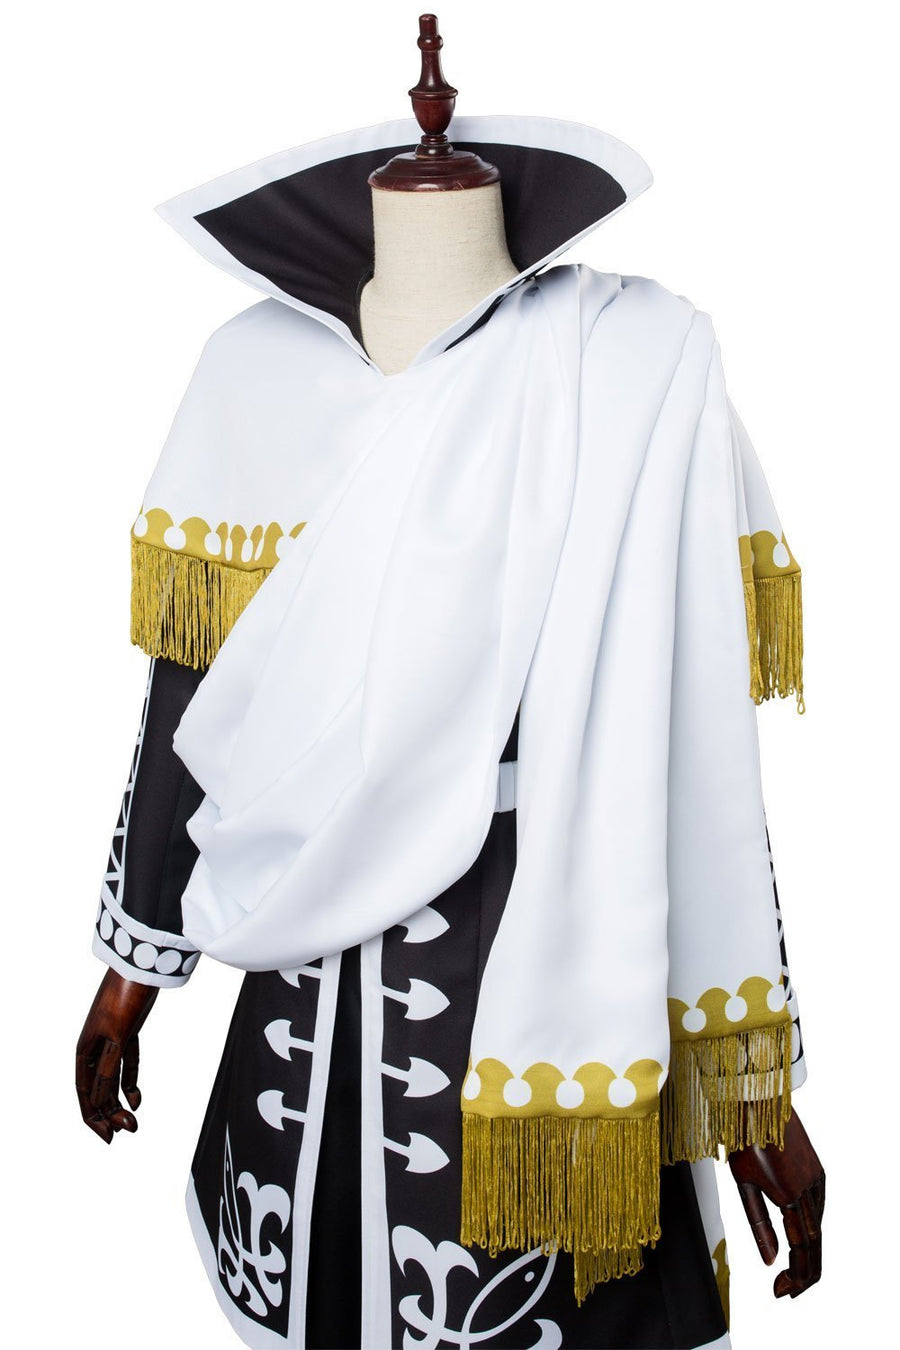 Fairy Tail Season 5 Cosplay Zeref Dragneel Emperor Cosplay Costume Outfit Cape - roblox medieval white cloak